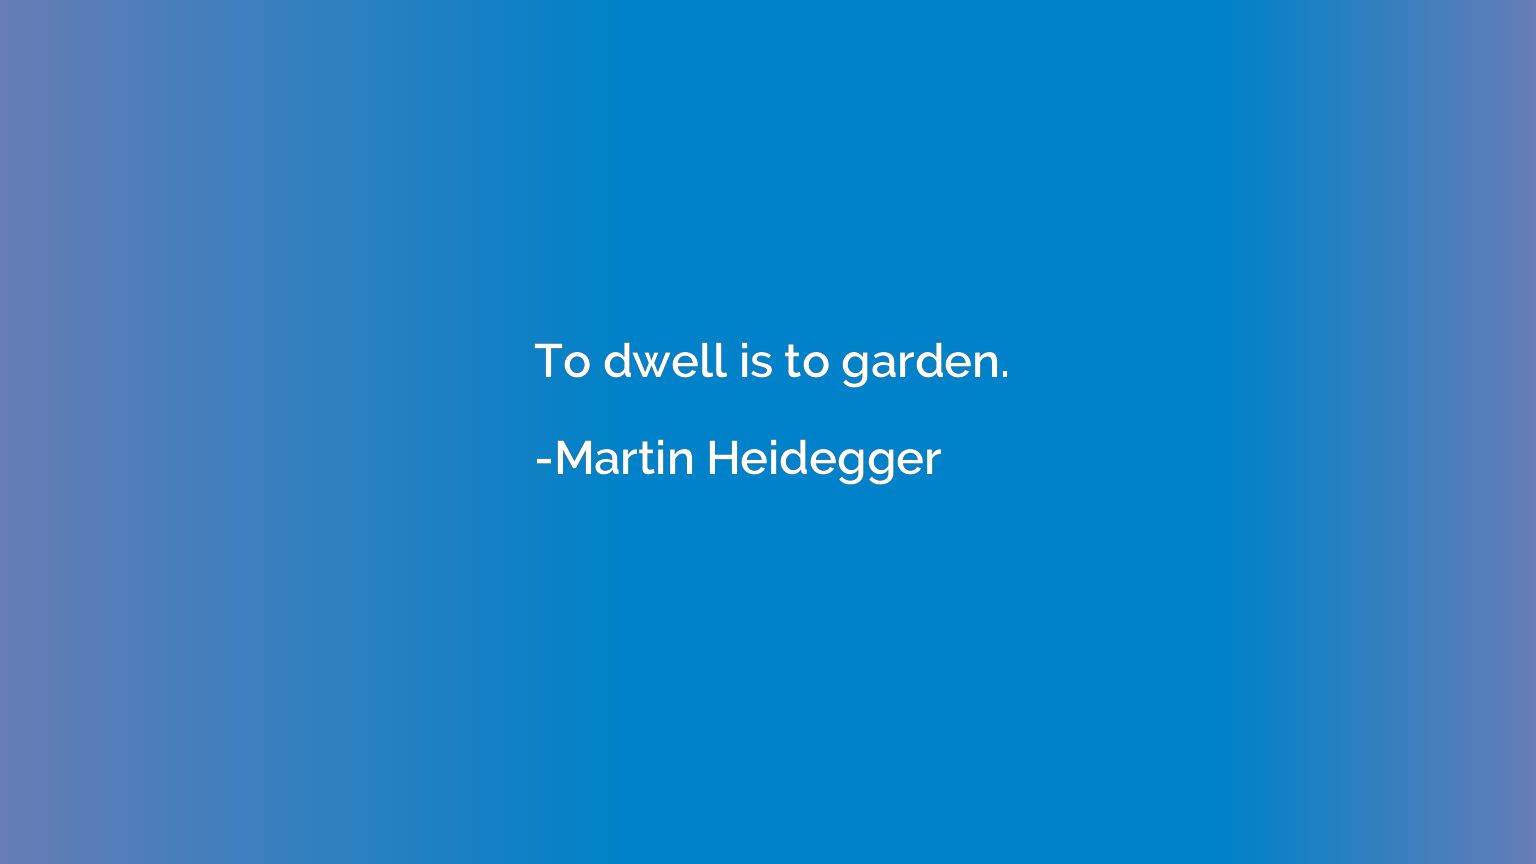 To dwell is to garden.